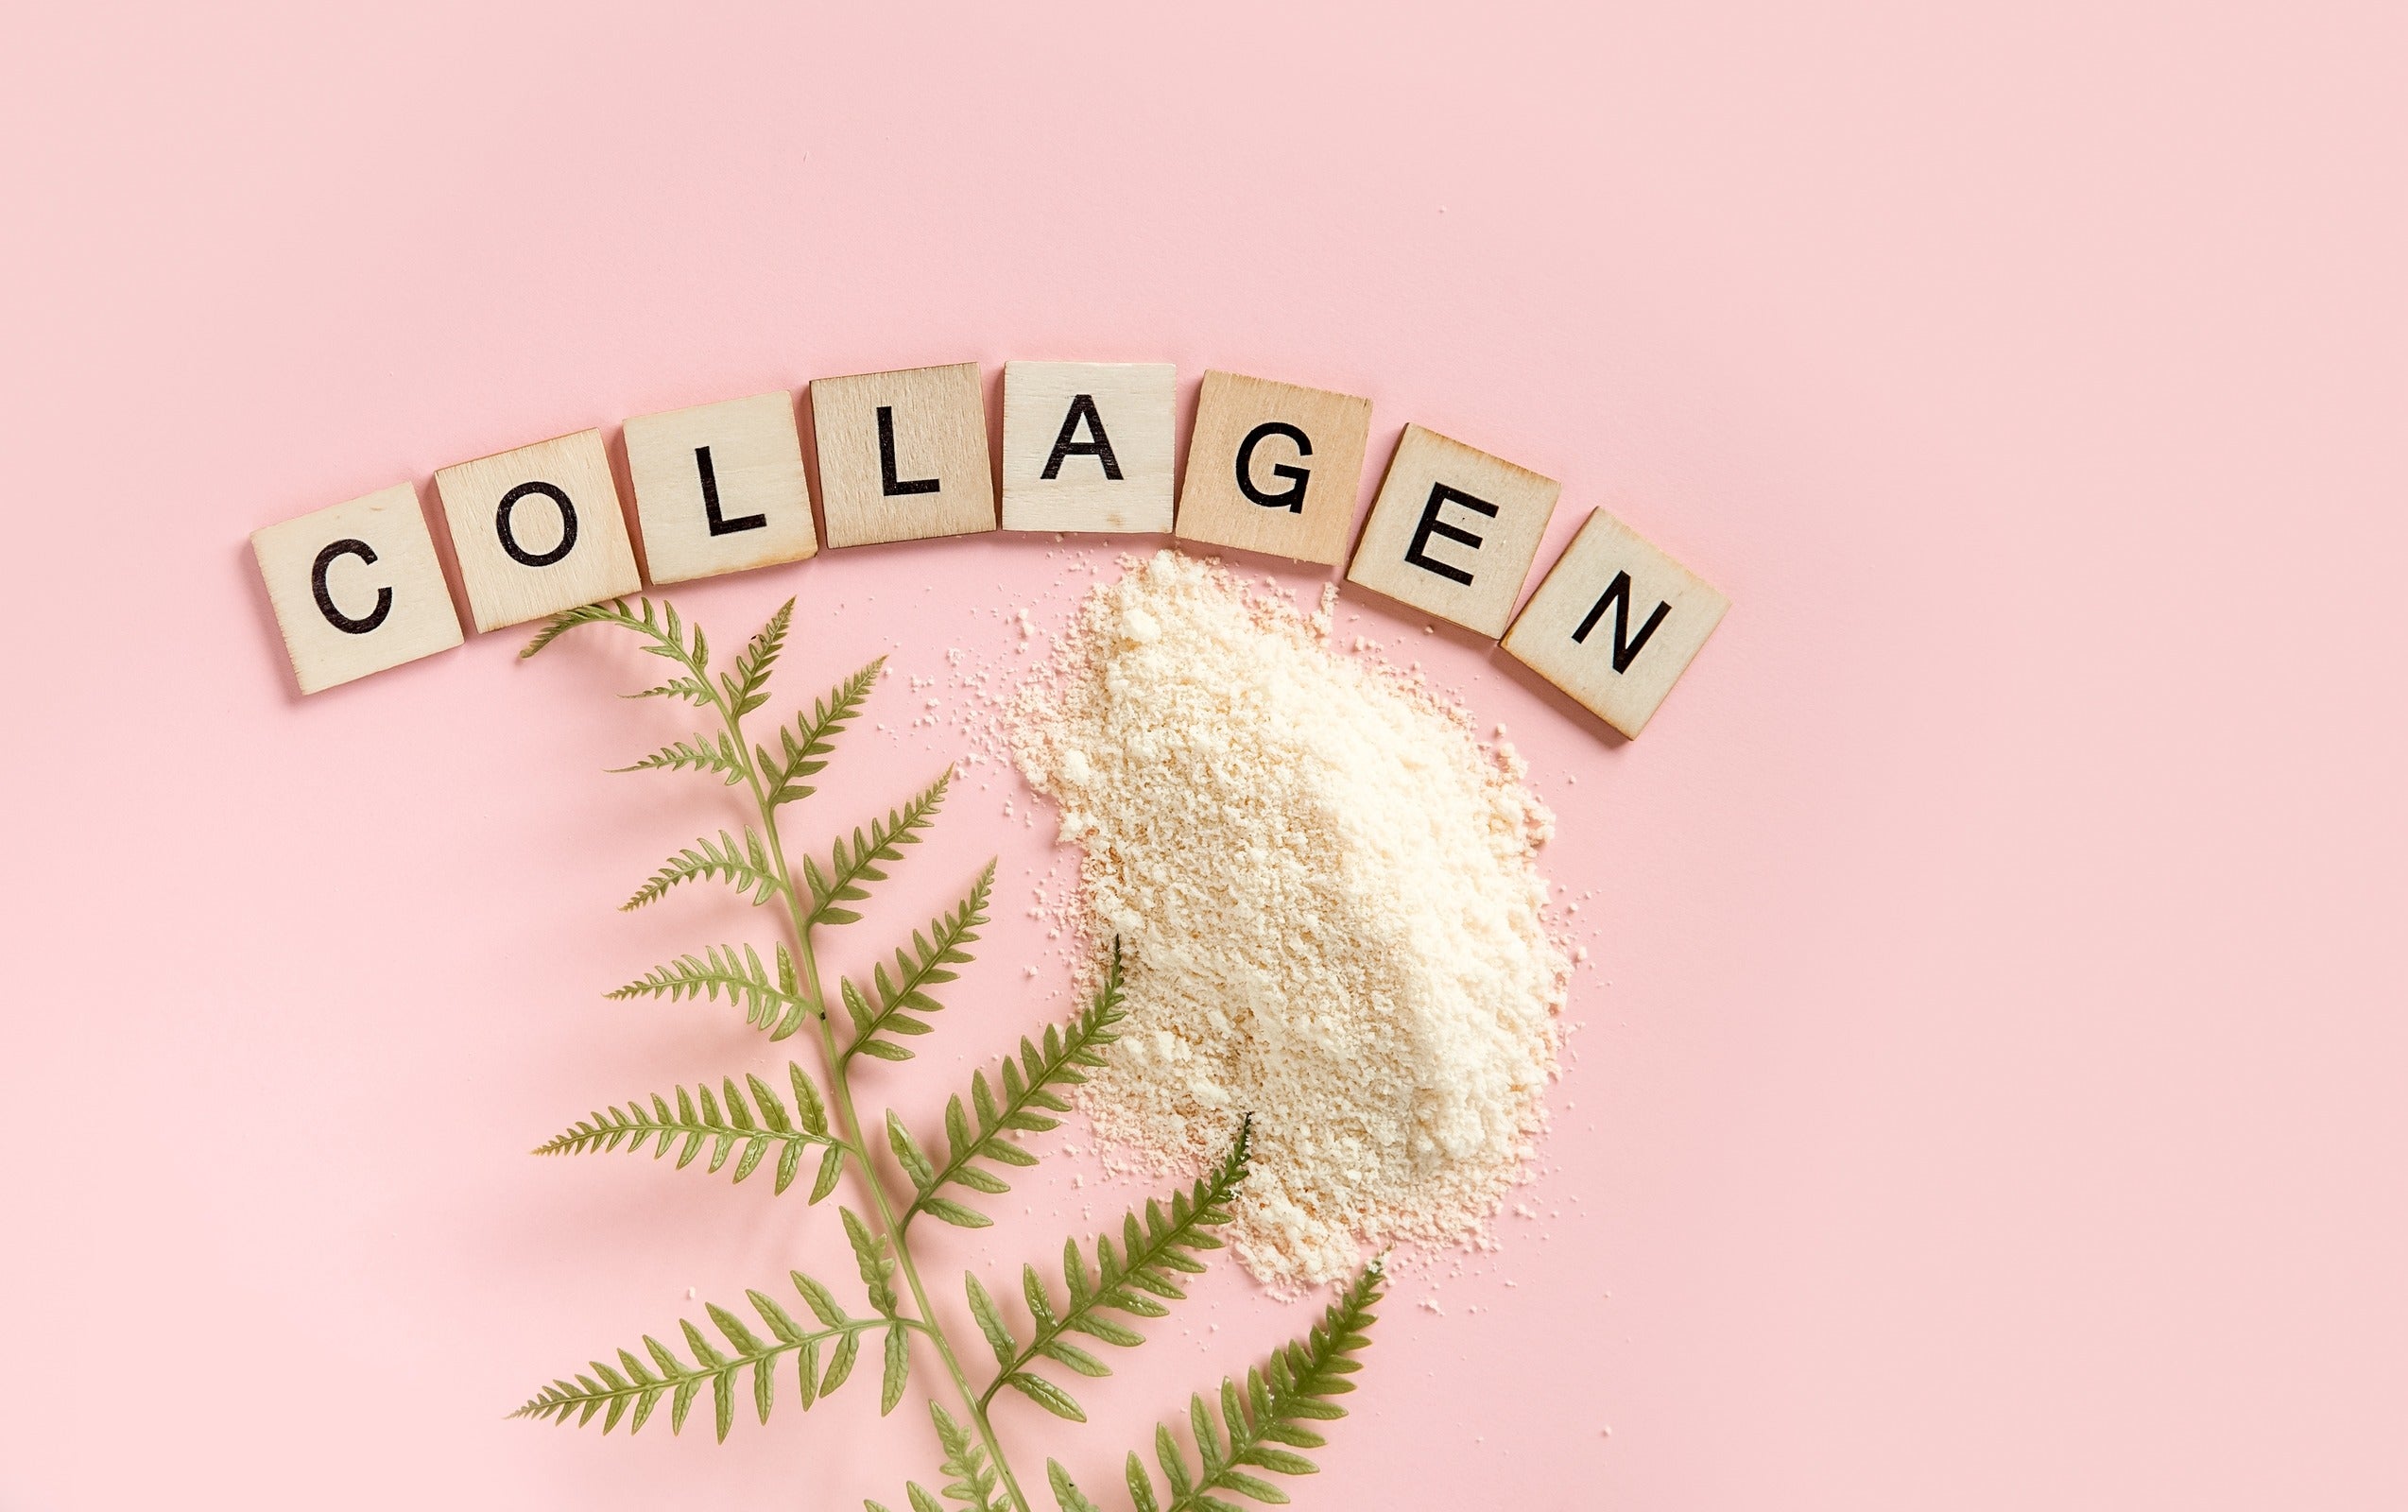 A boost in collagen production with laser skin resurfacing